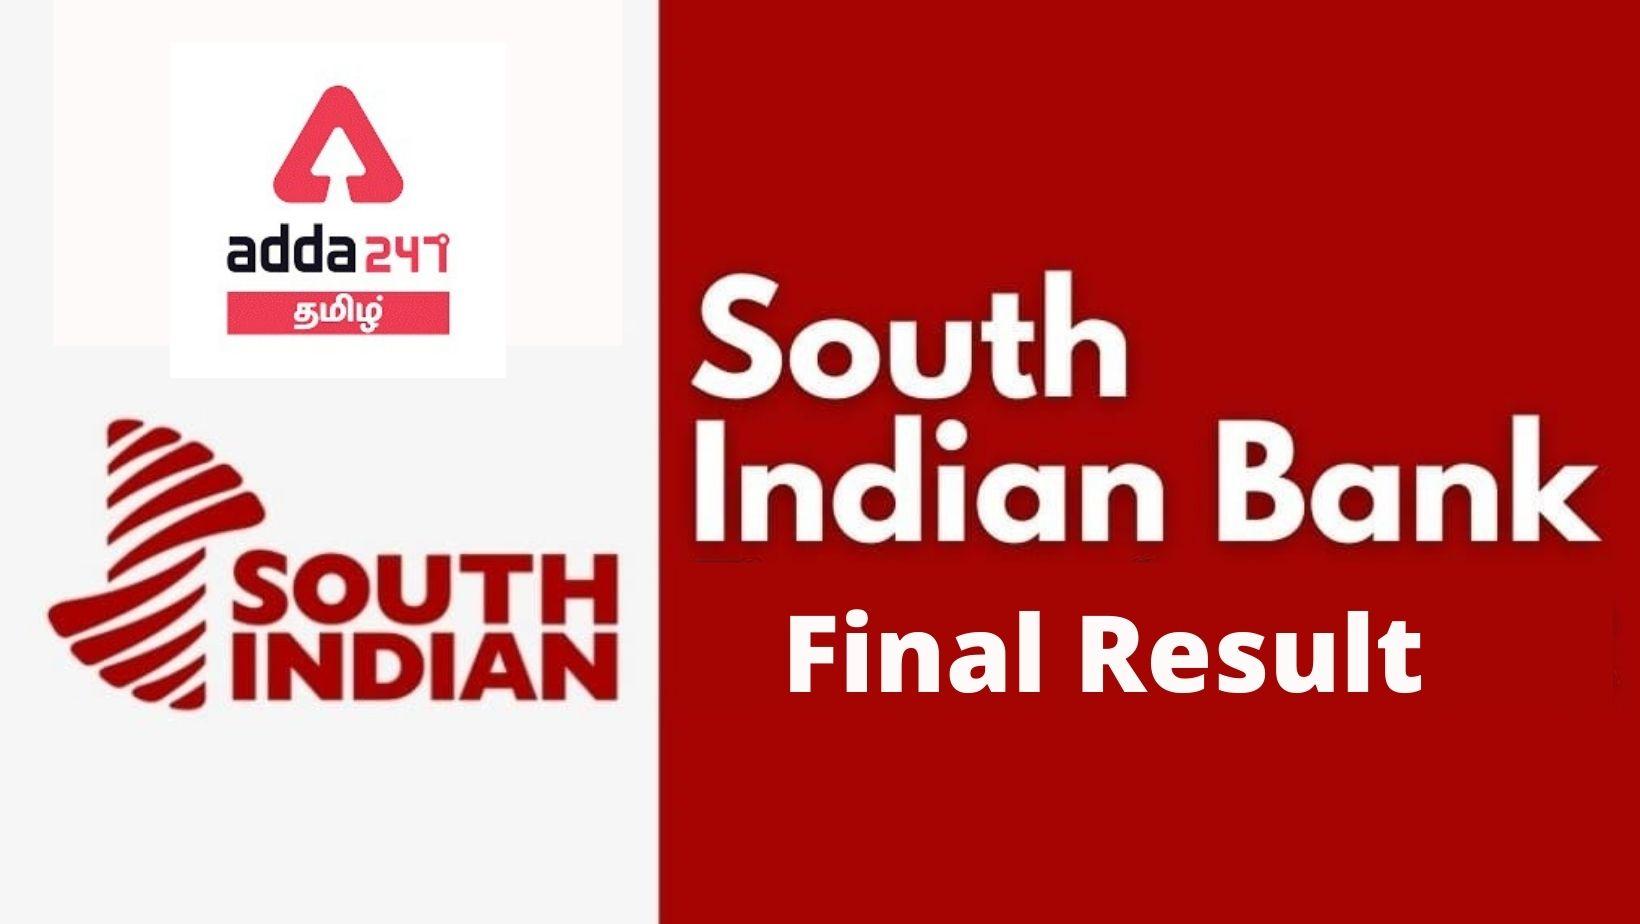 south Indian Bank final result